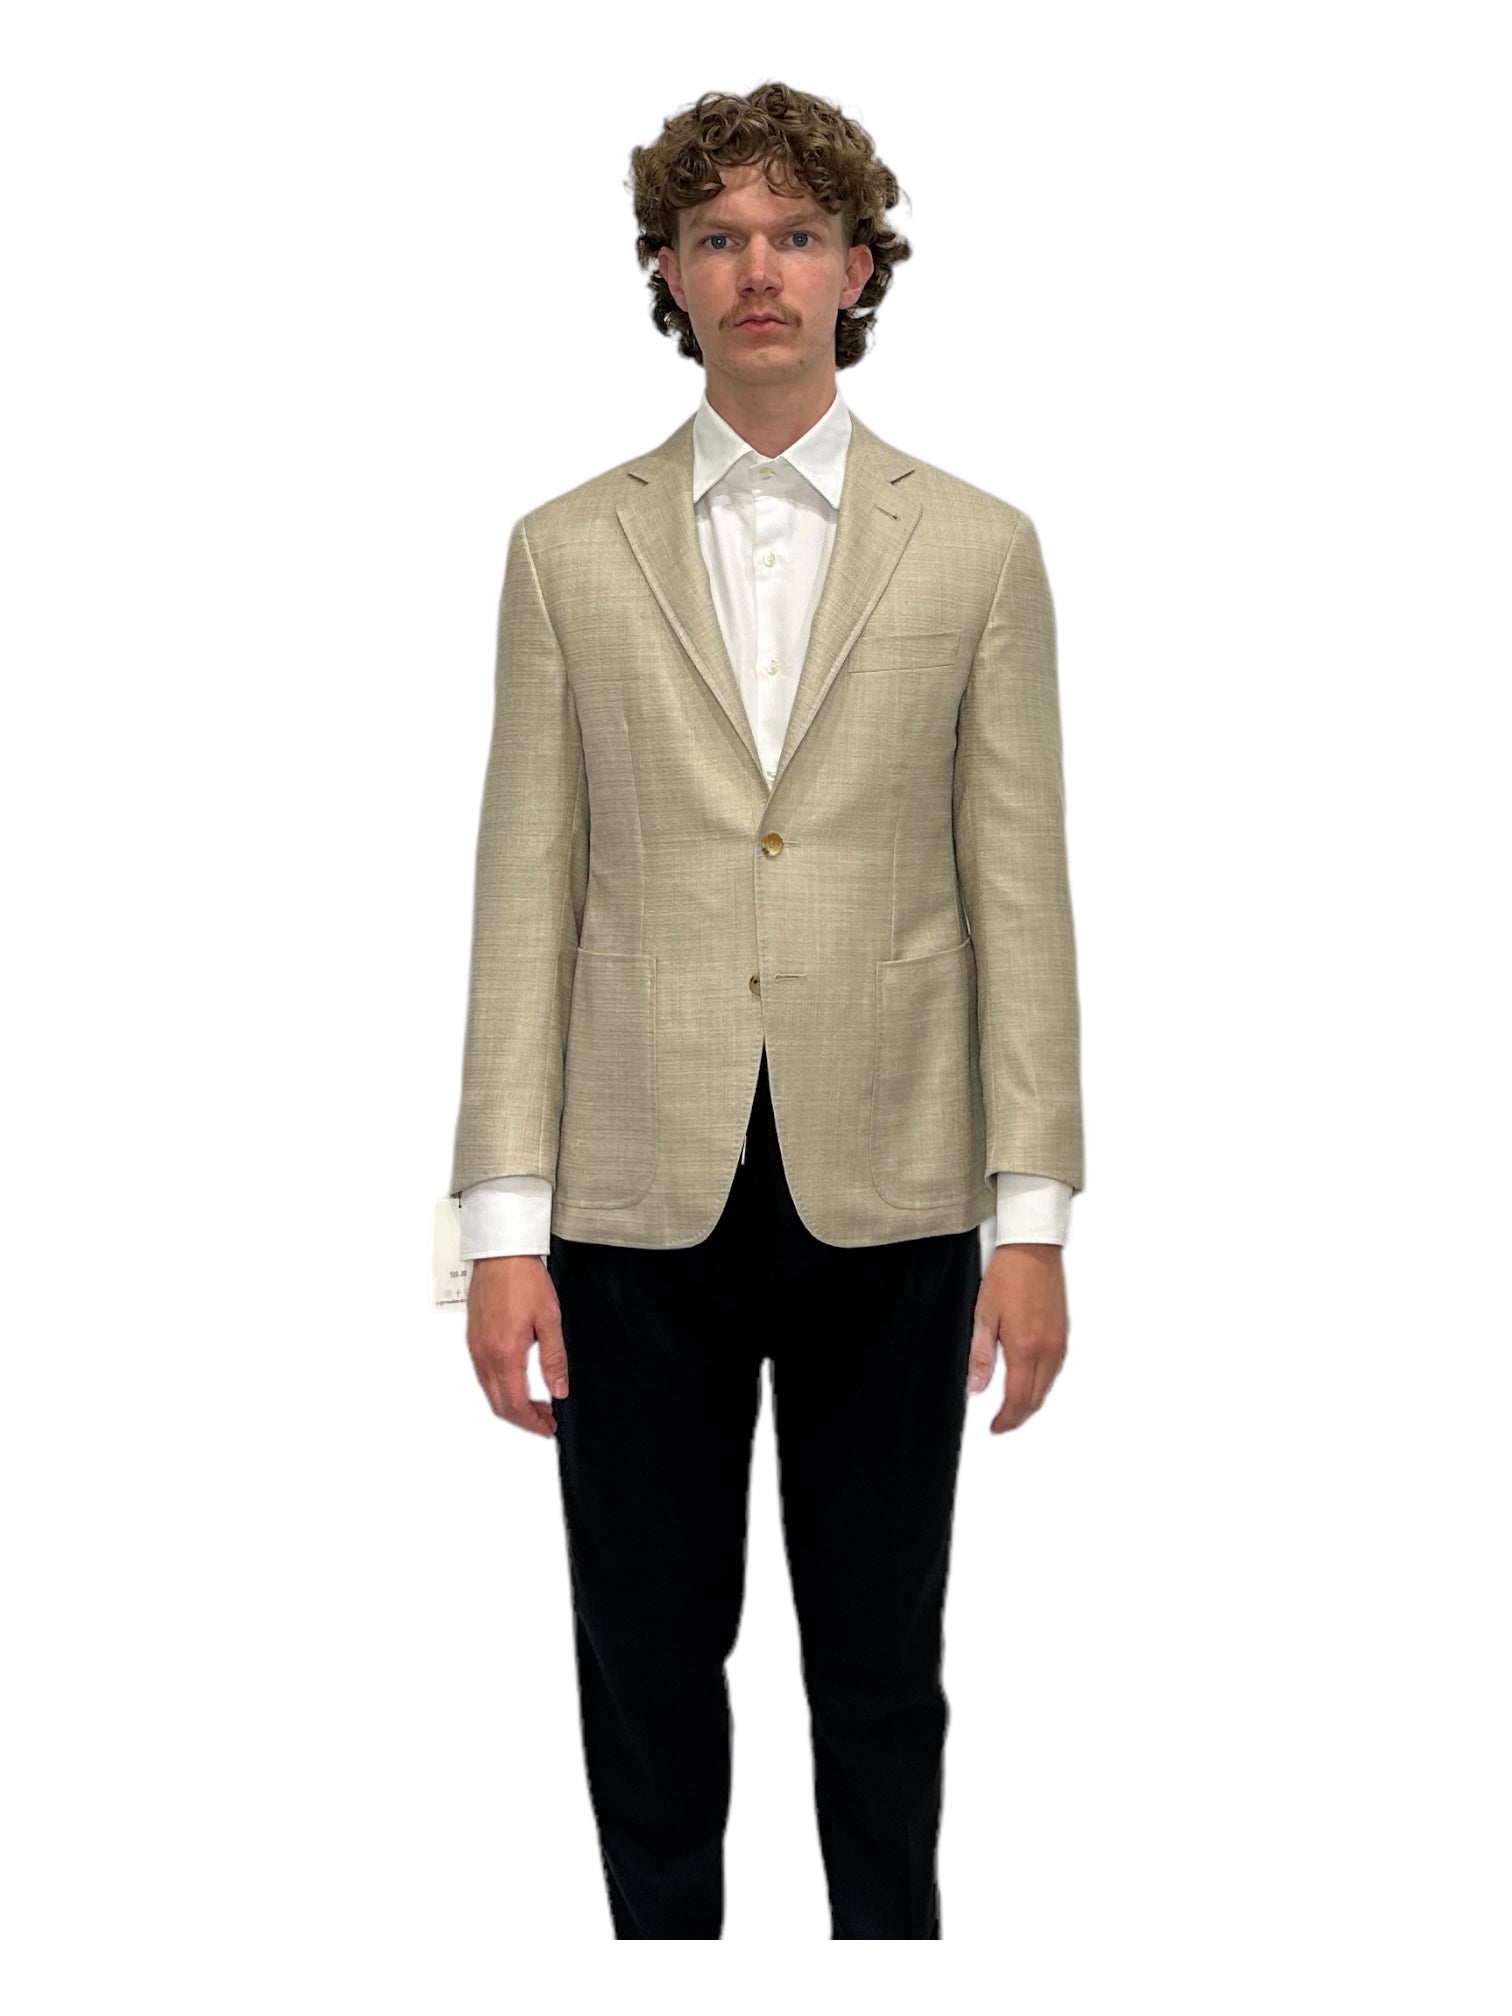 Canali Cream Cupro Blazer 38R - Genuine Design Luxury Consignment for Men. New & Pre-Owned Clothing, Shoes, & Accessories. Calgary, Canada